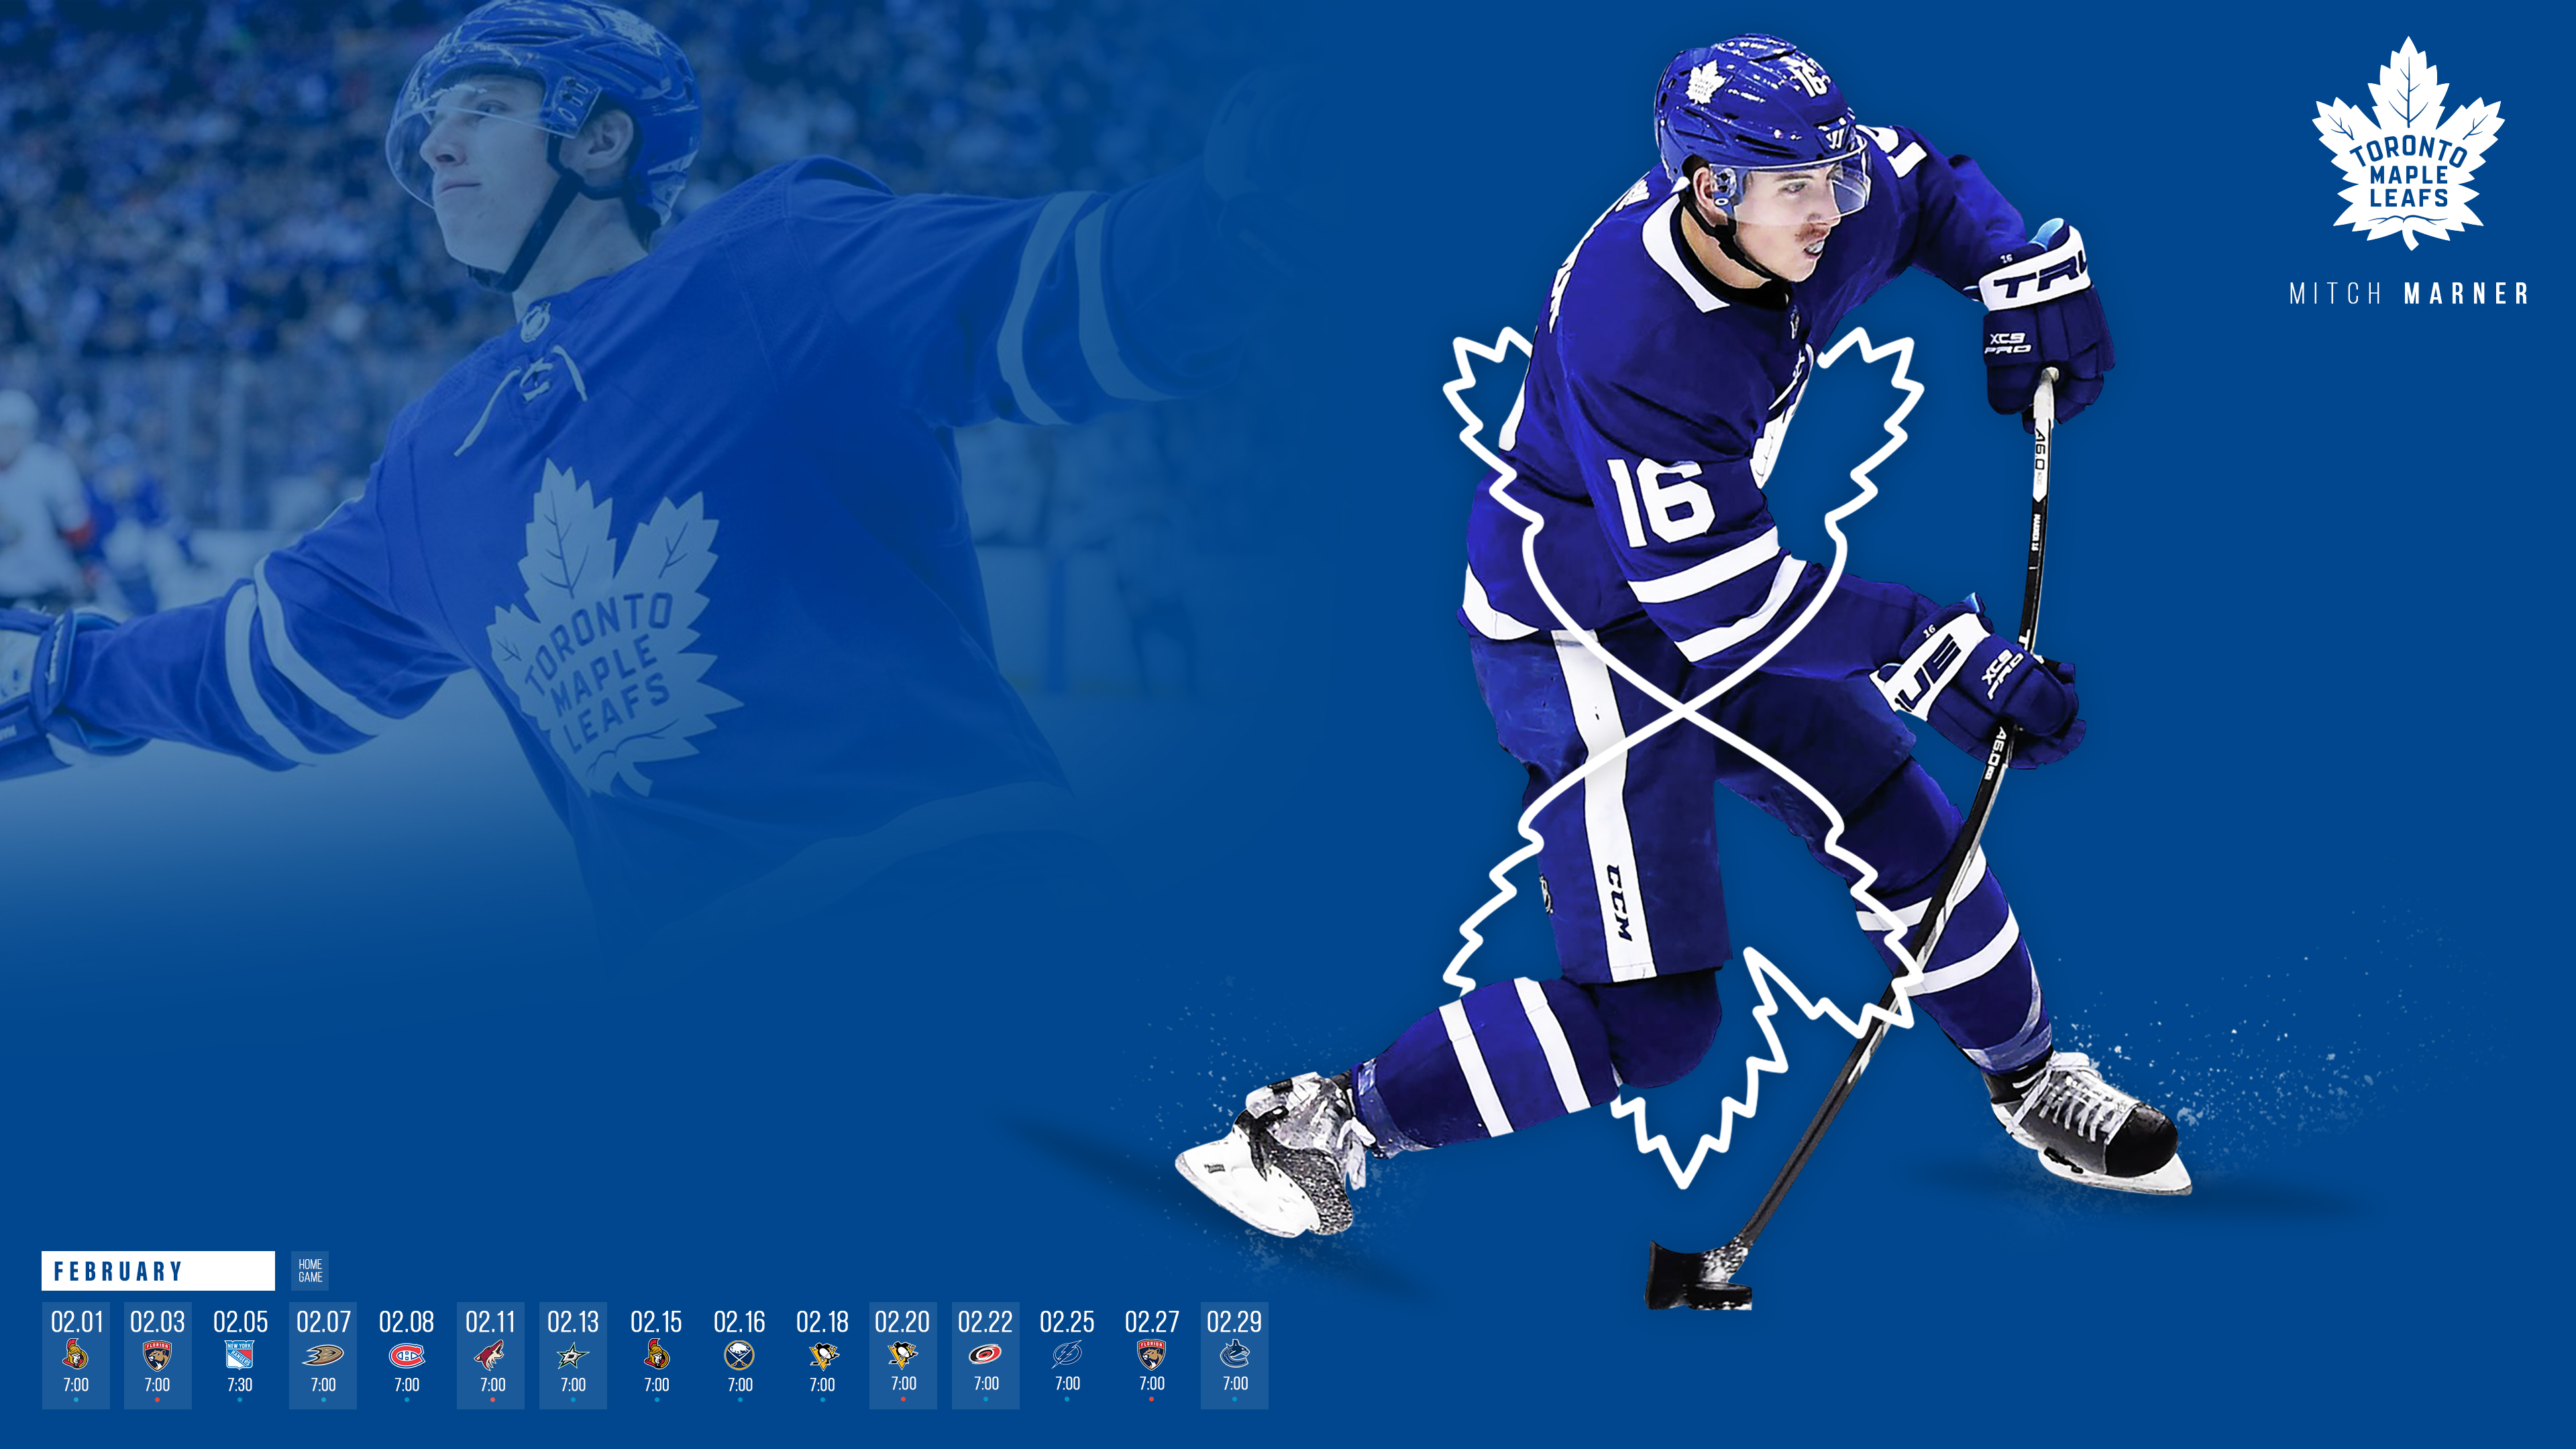 3840x2160 February Player Wallpaper Magic Mitch Edition Additional Wallpapers in comments also! : r/leafs